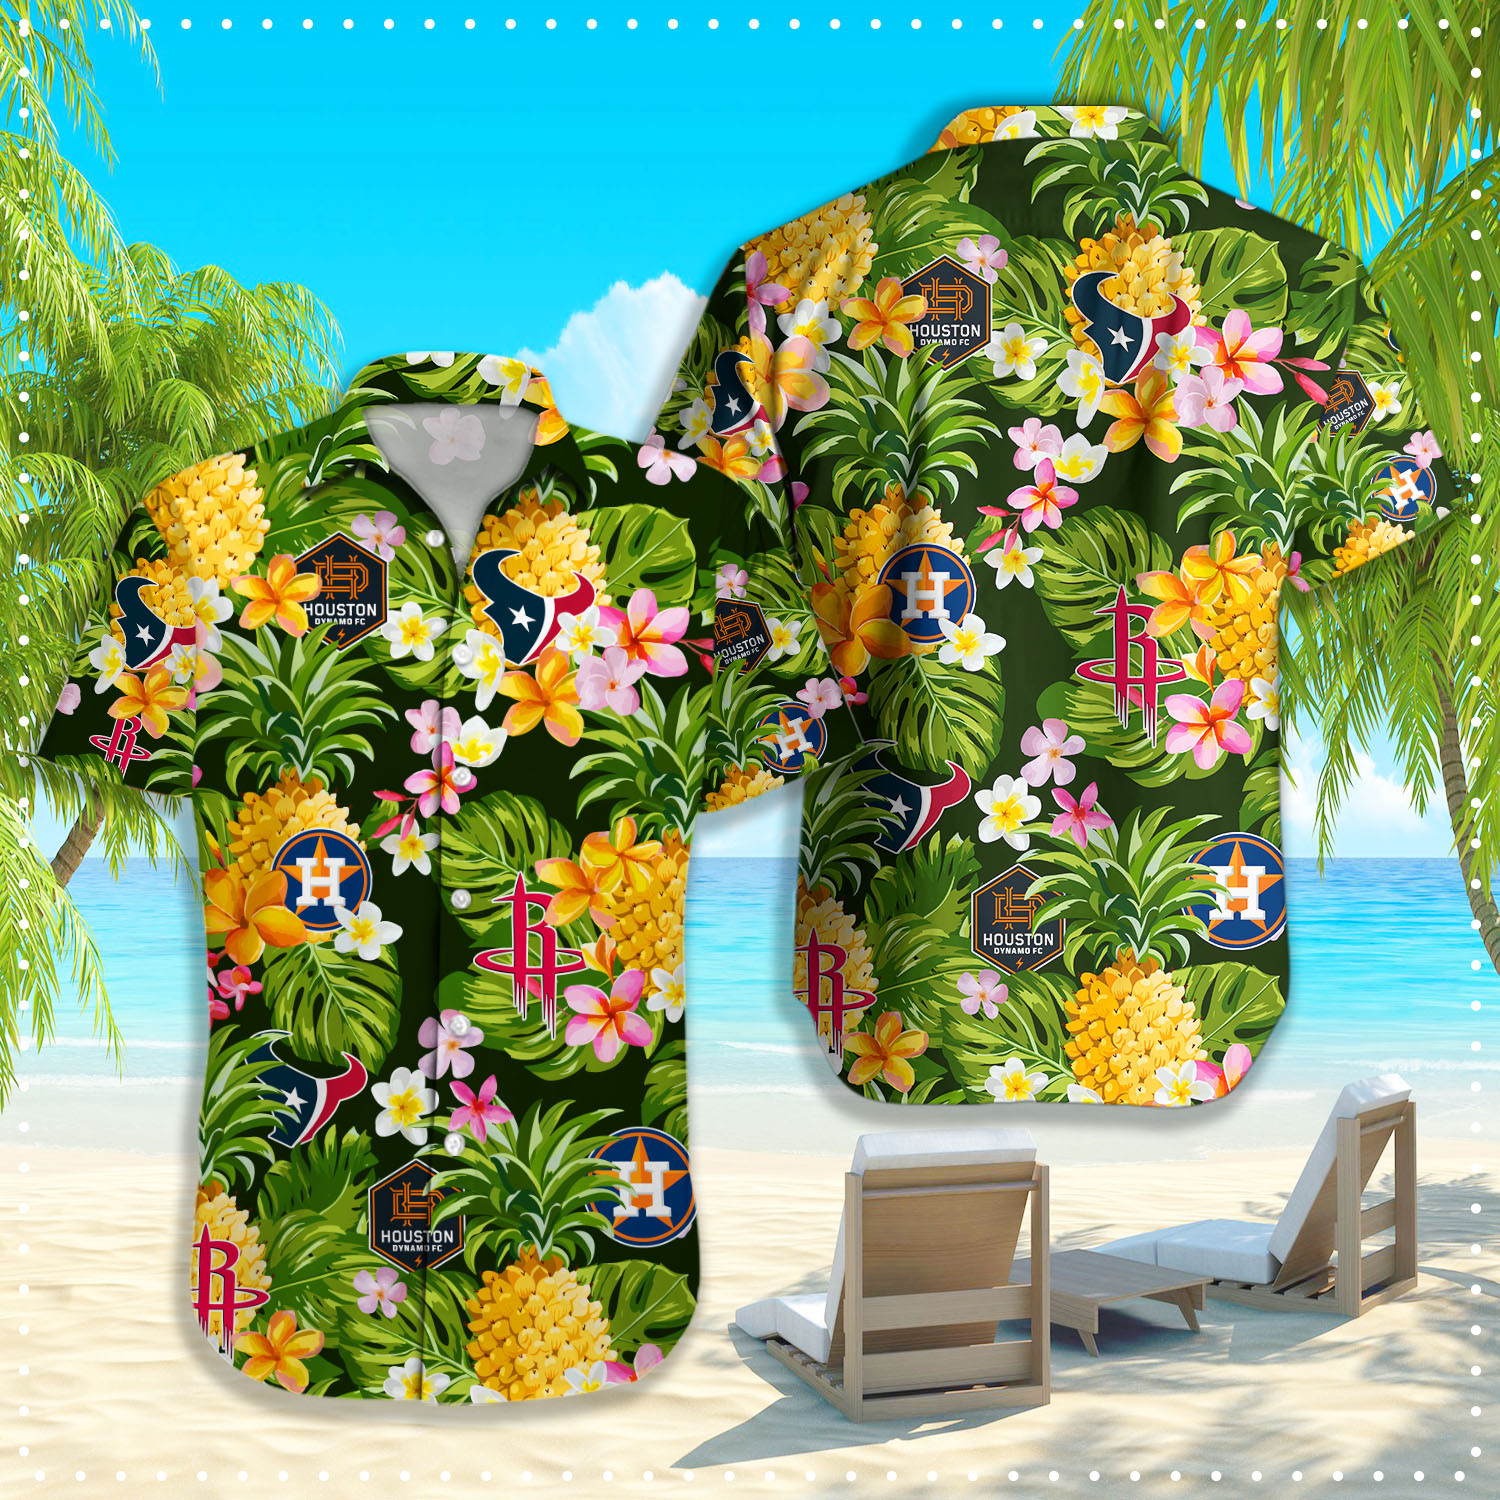 If you're looking for a NHL Hawaiian shirt to wear, don't wait until the last minute! 197